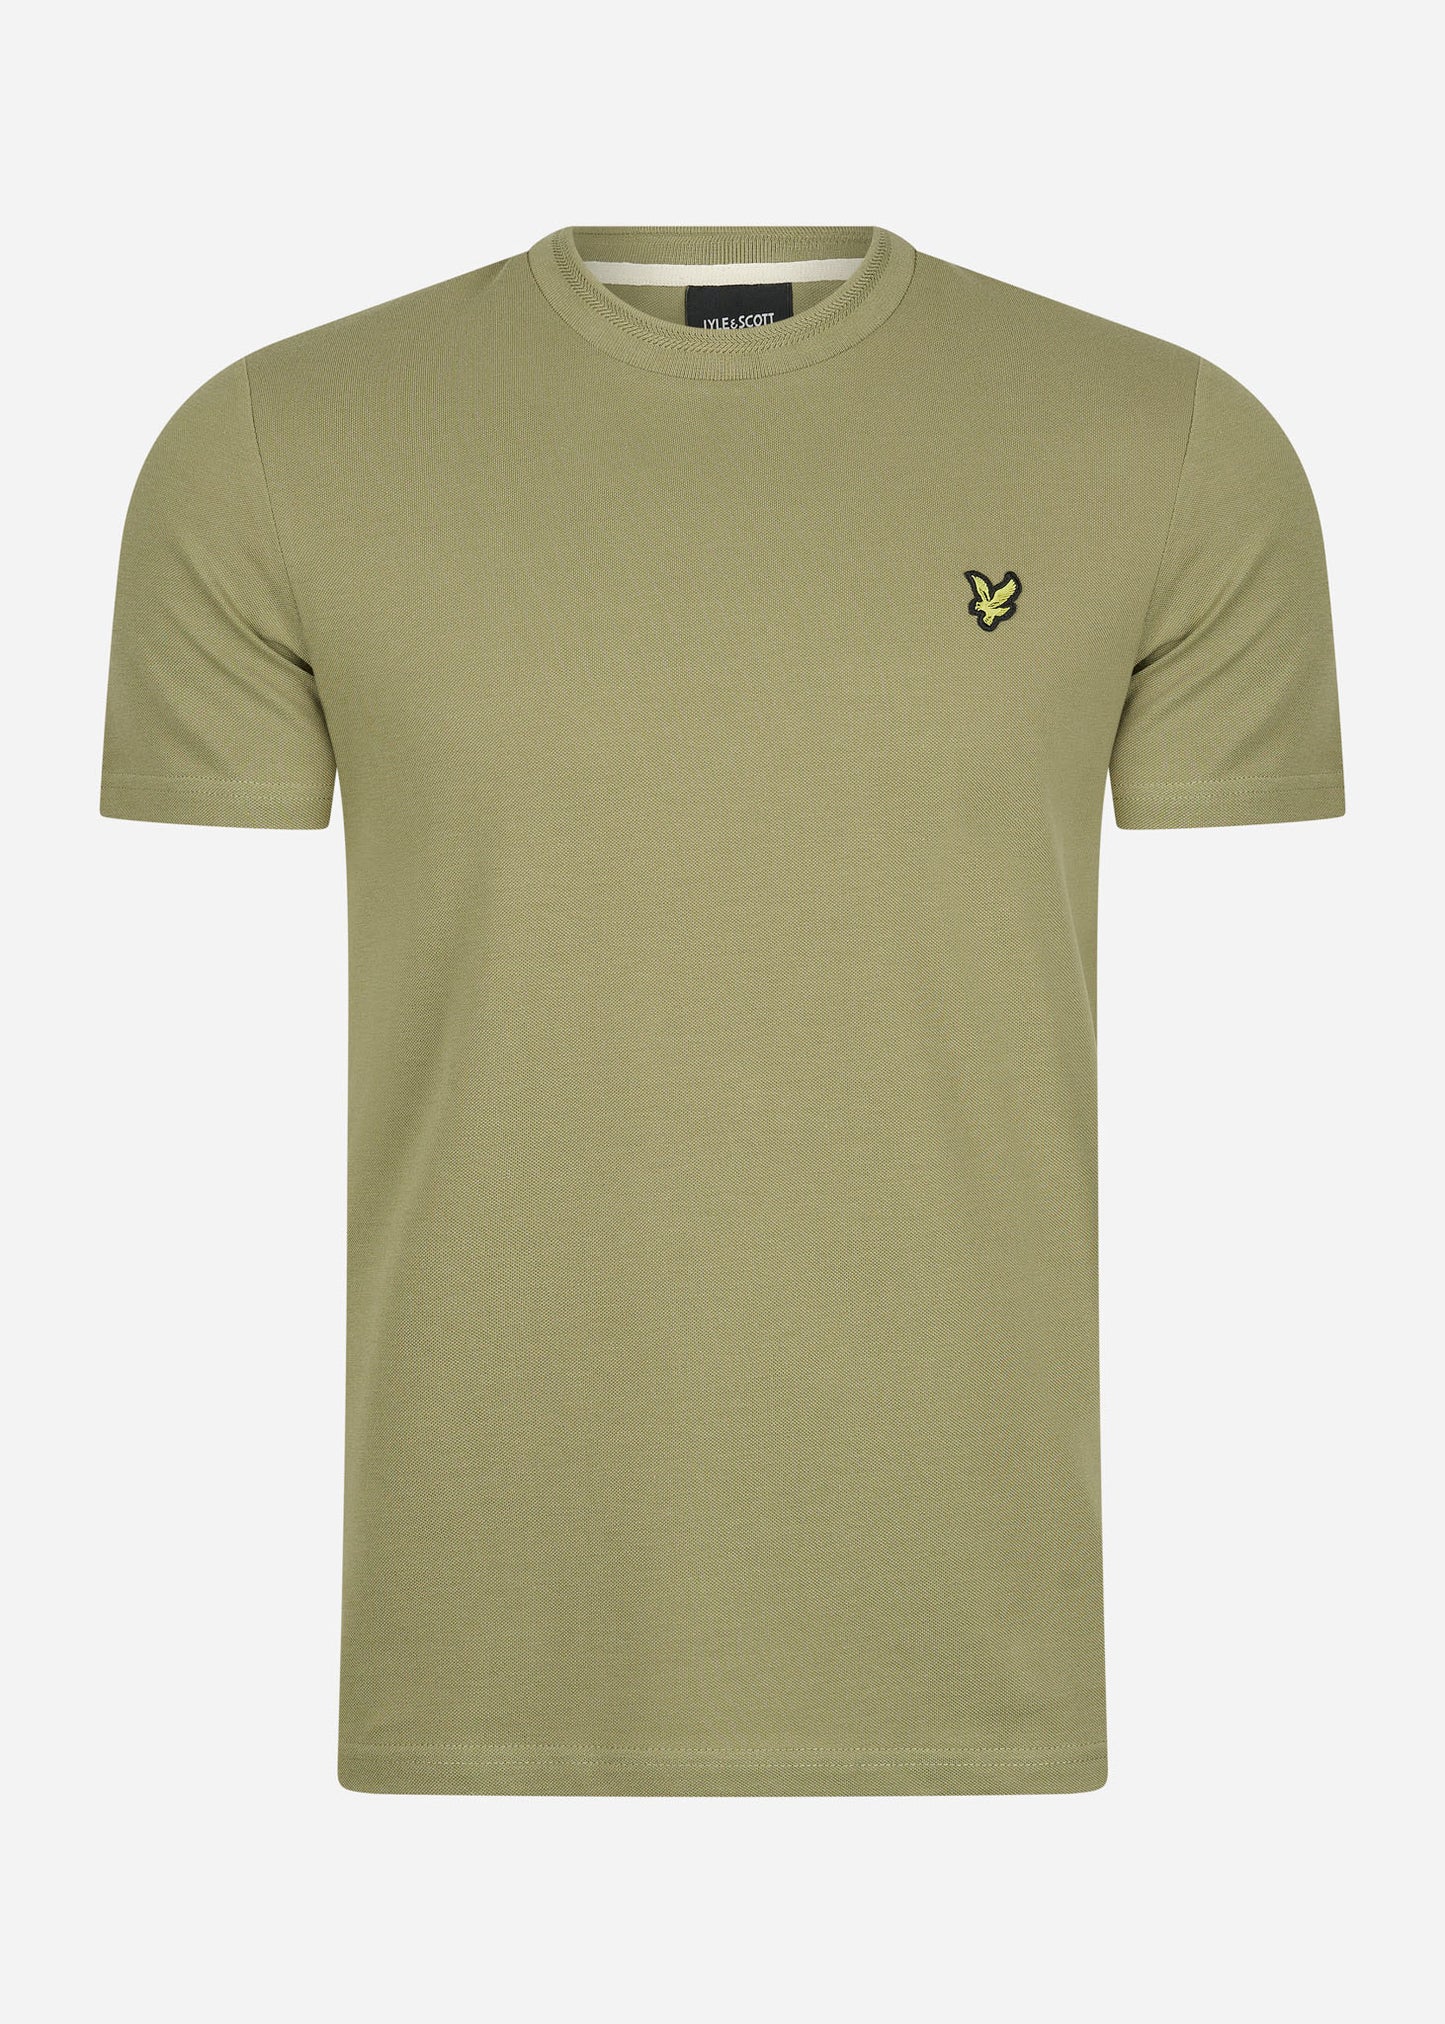 Crest tipped t-shirt - seaweed